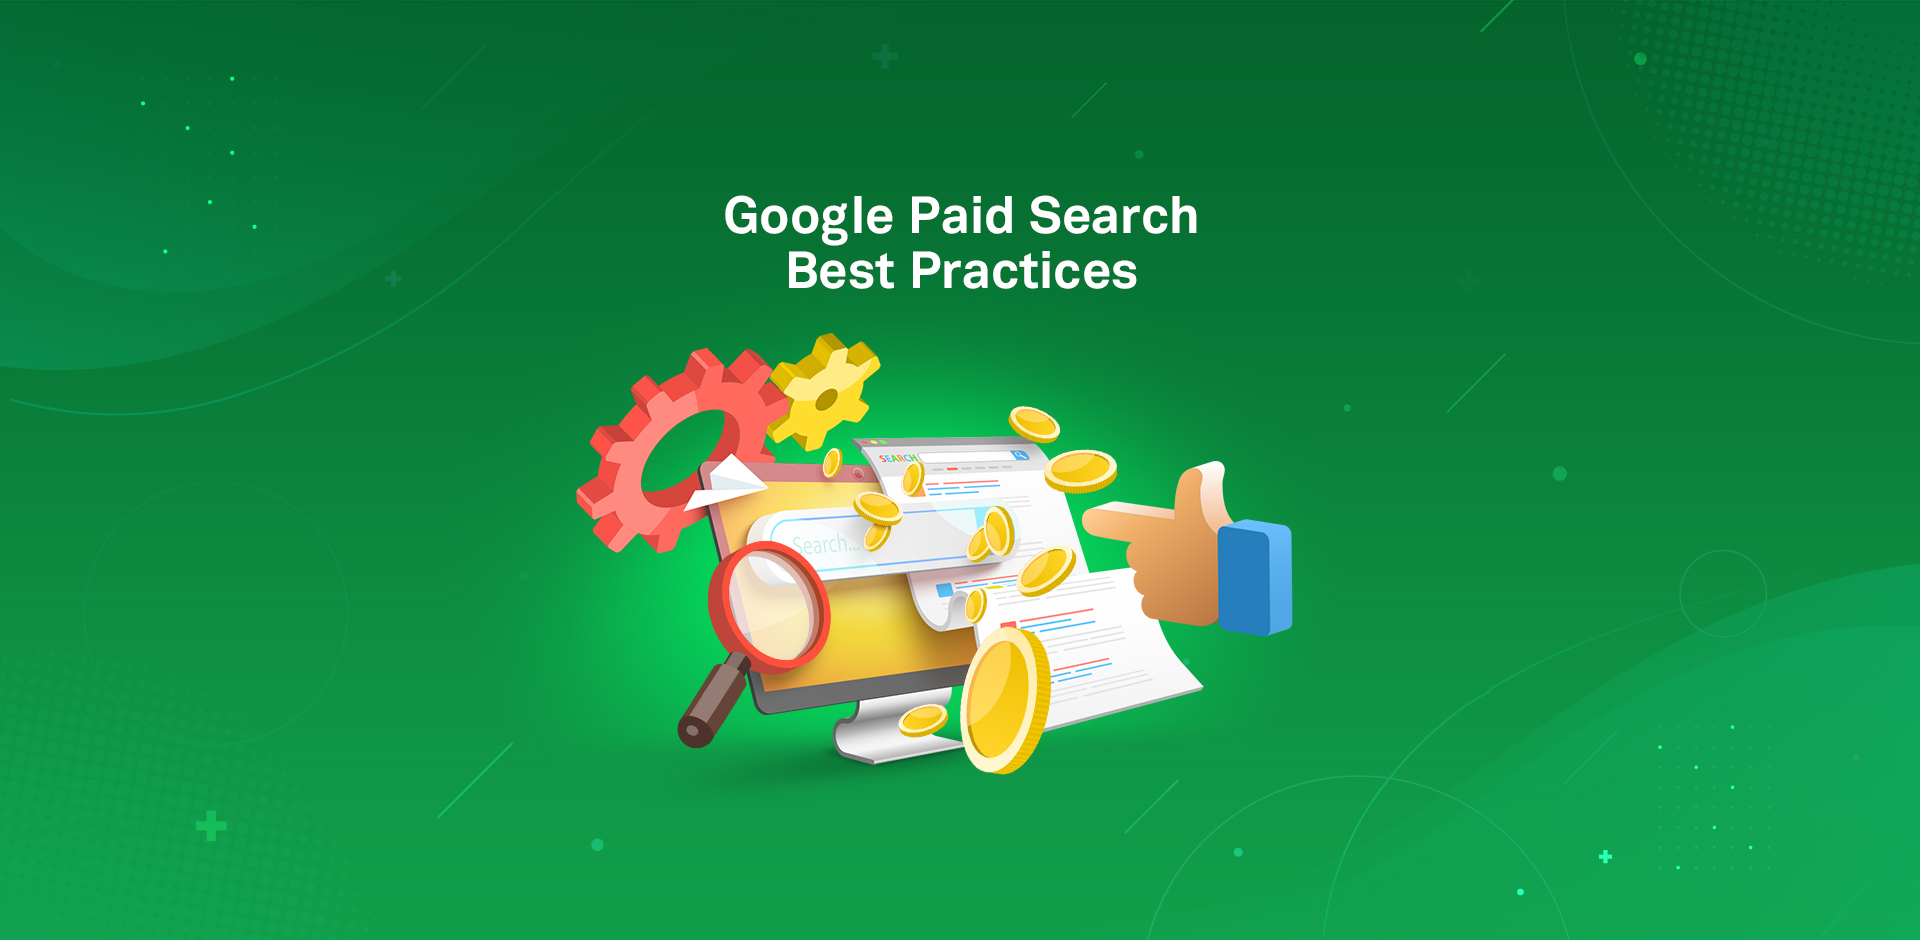 Google Paid Search Best Practices